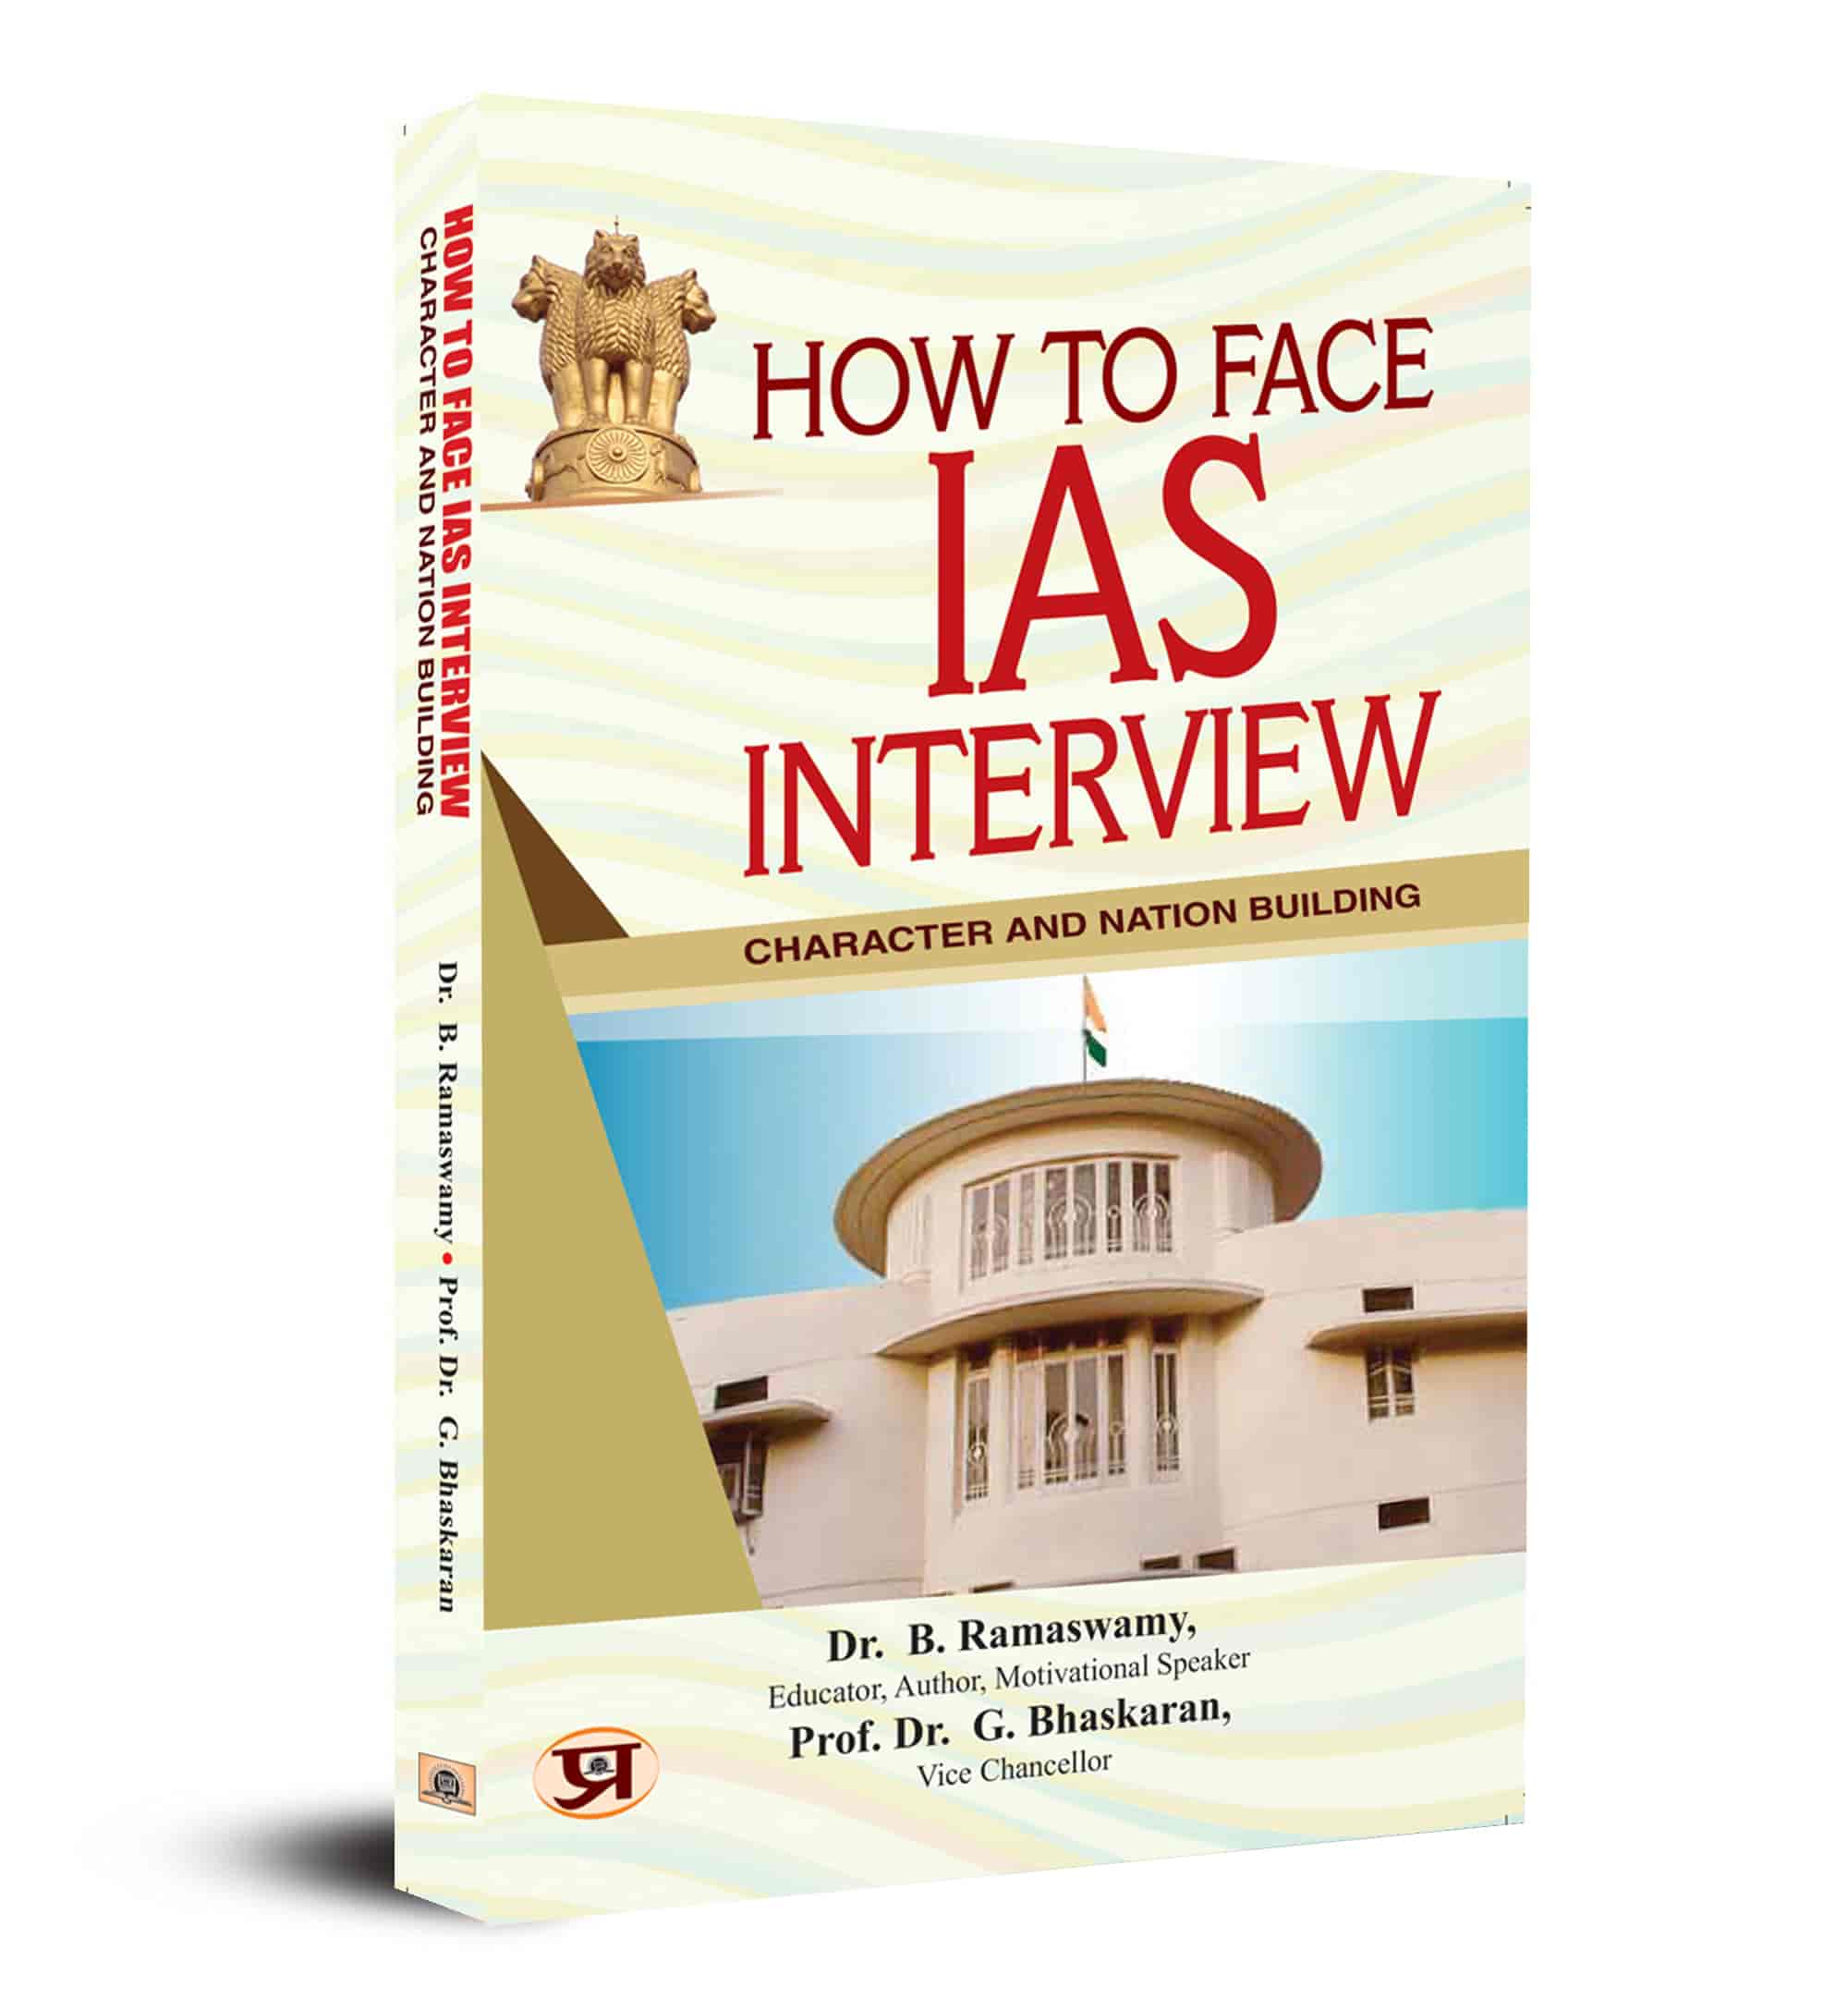 How To Face IAS Interview: Character and Nation Building (PB)